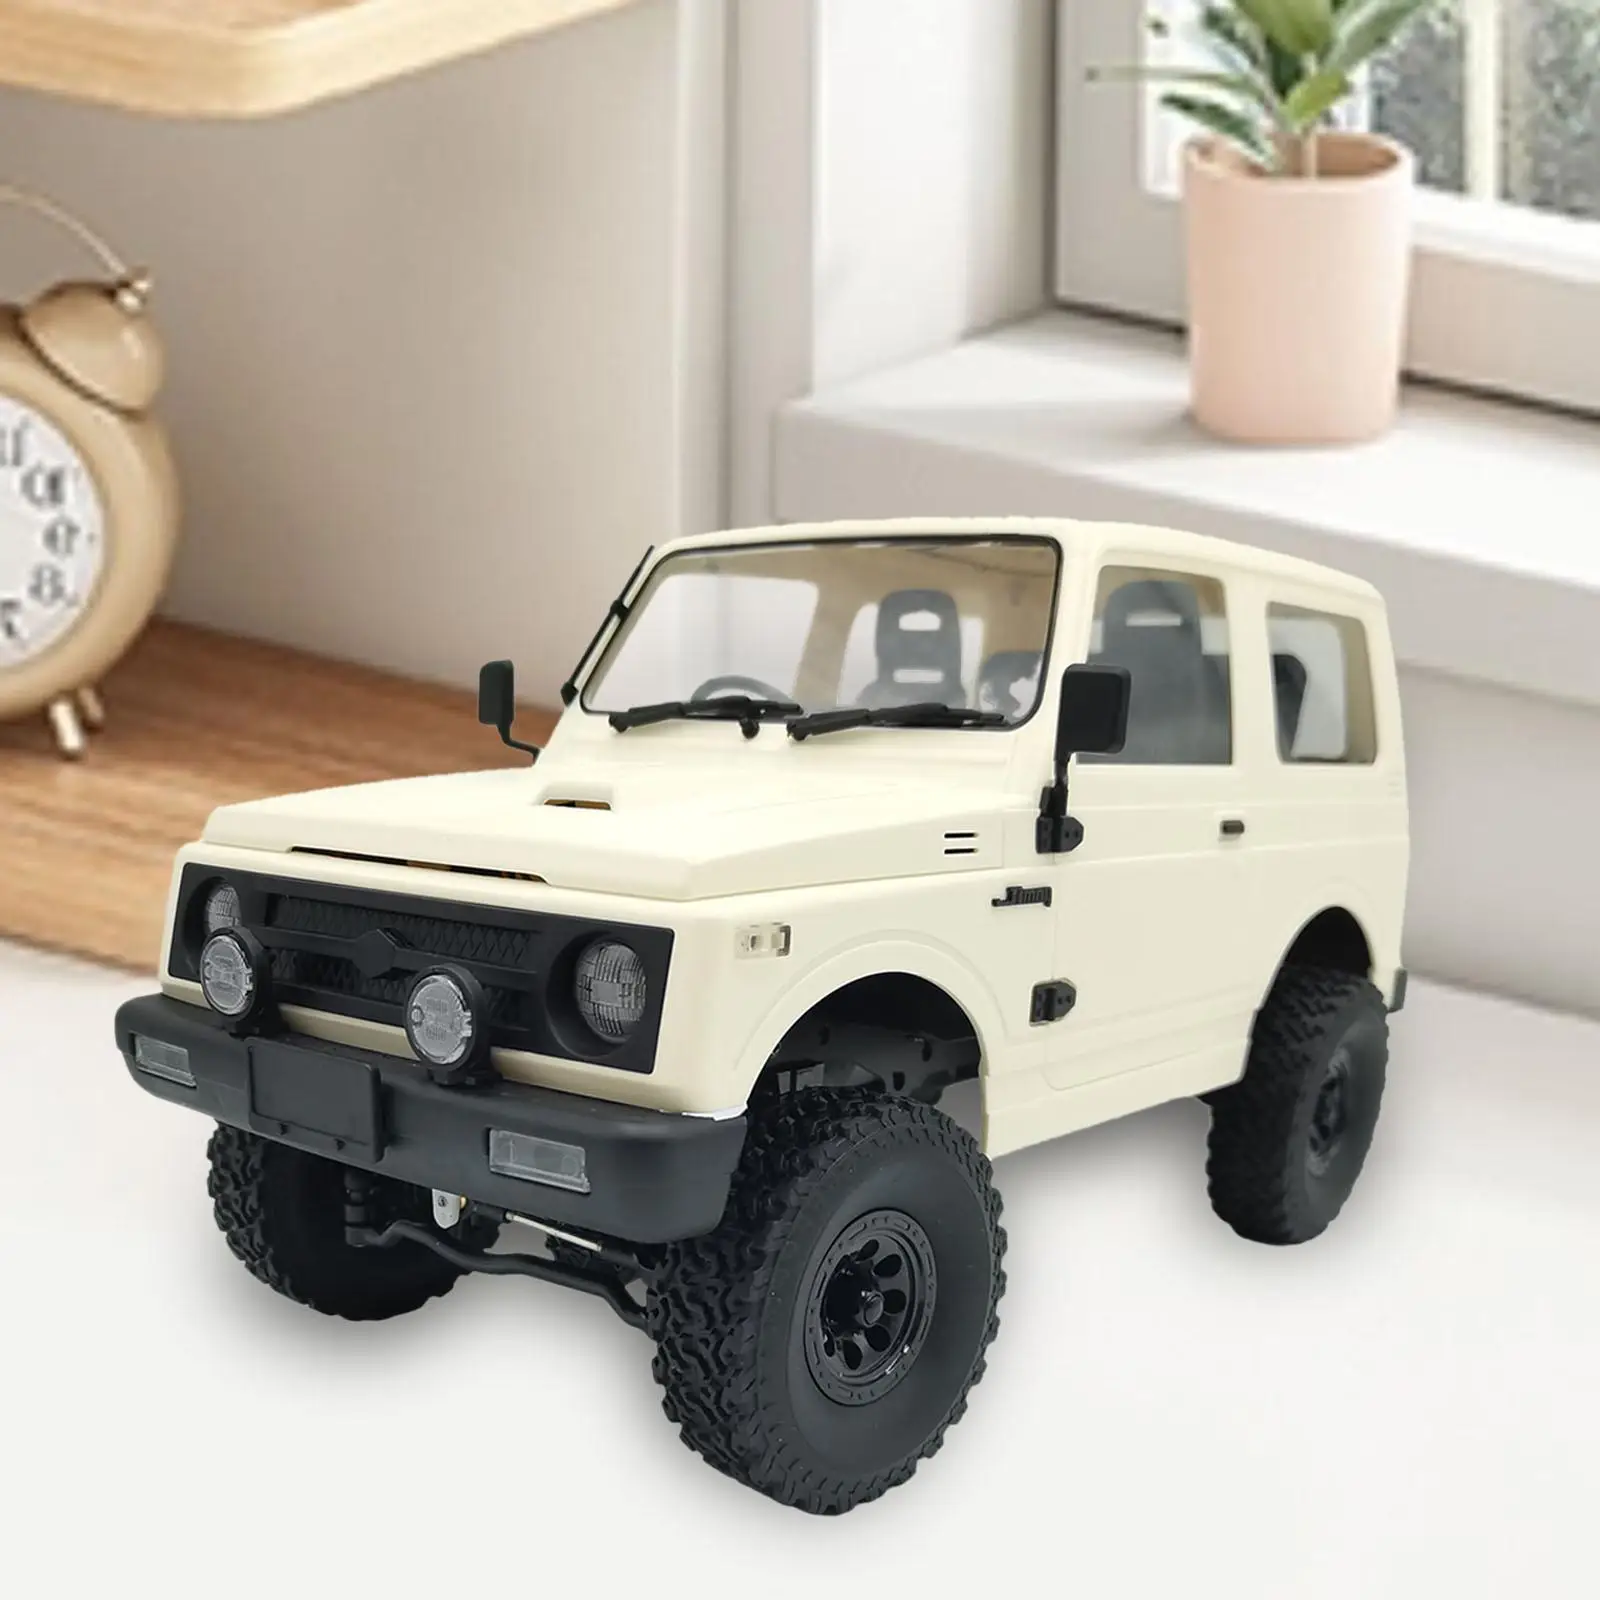 C74 4WD Electric Hobby Toy Climbing Car Model 1/10 WL01 RC Car Toy Vehicles Toy Hobby Grade Toy for Children Boy Girl Kids Gift